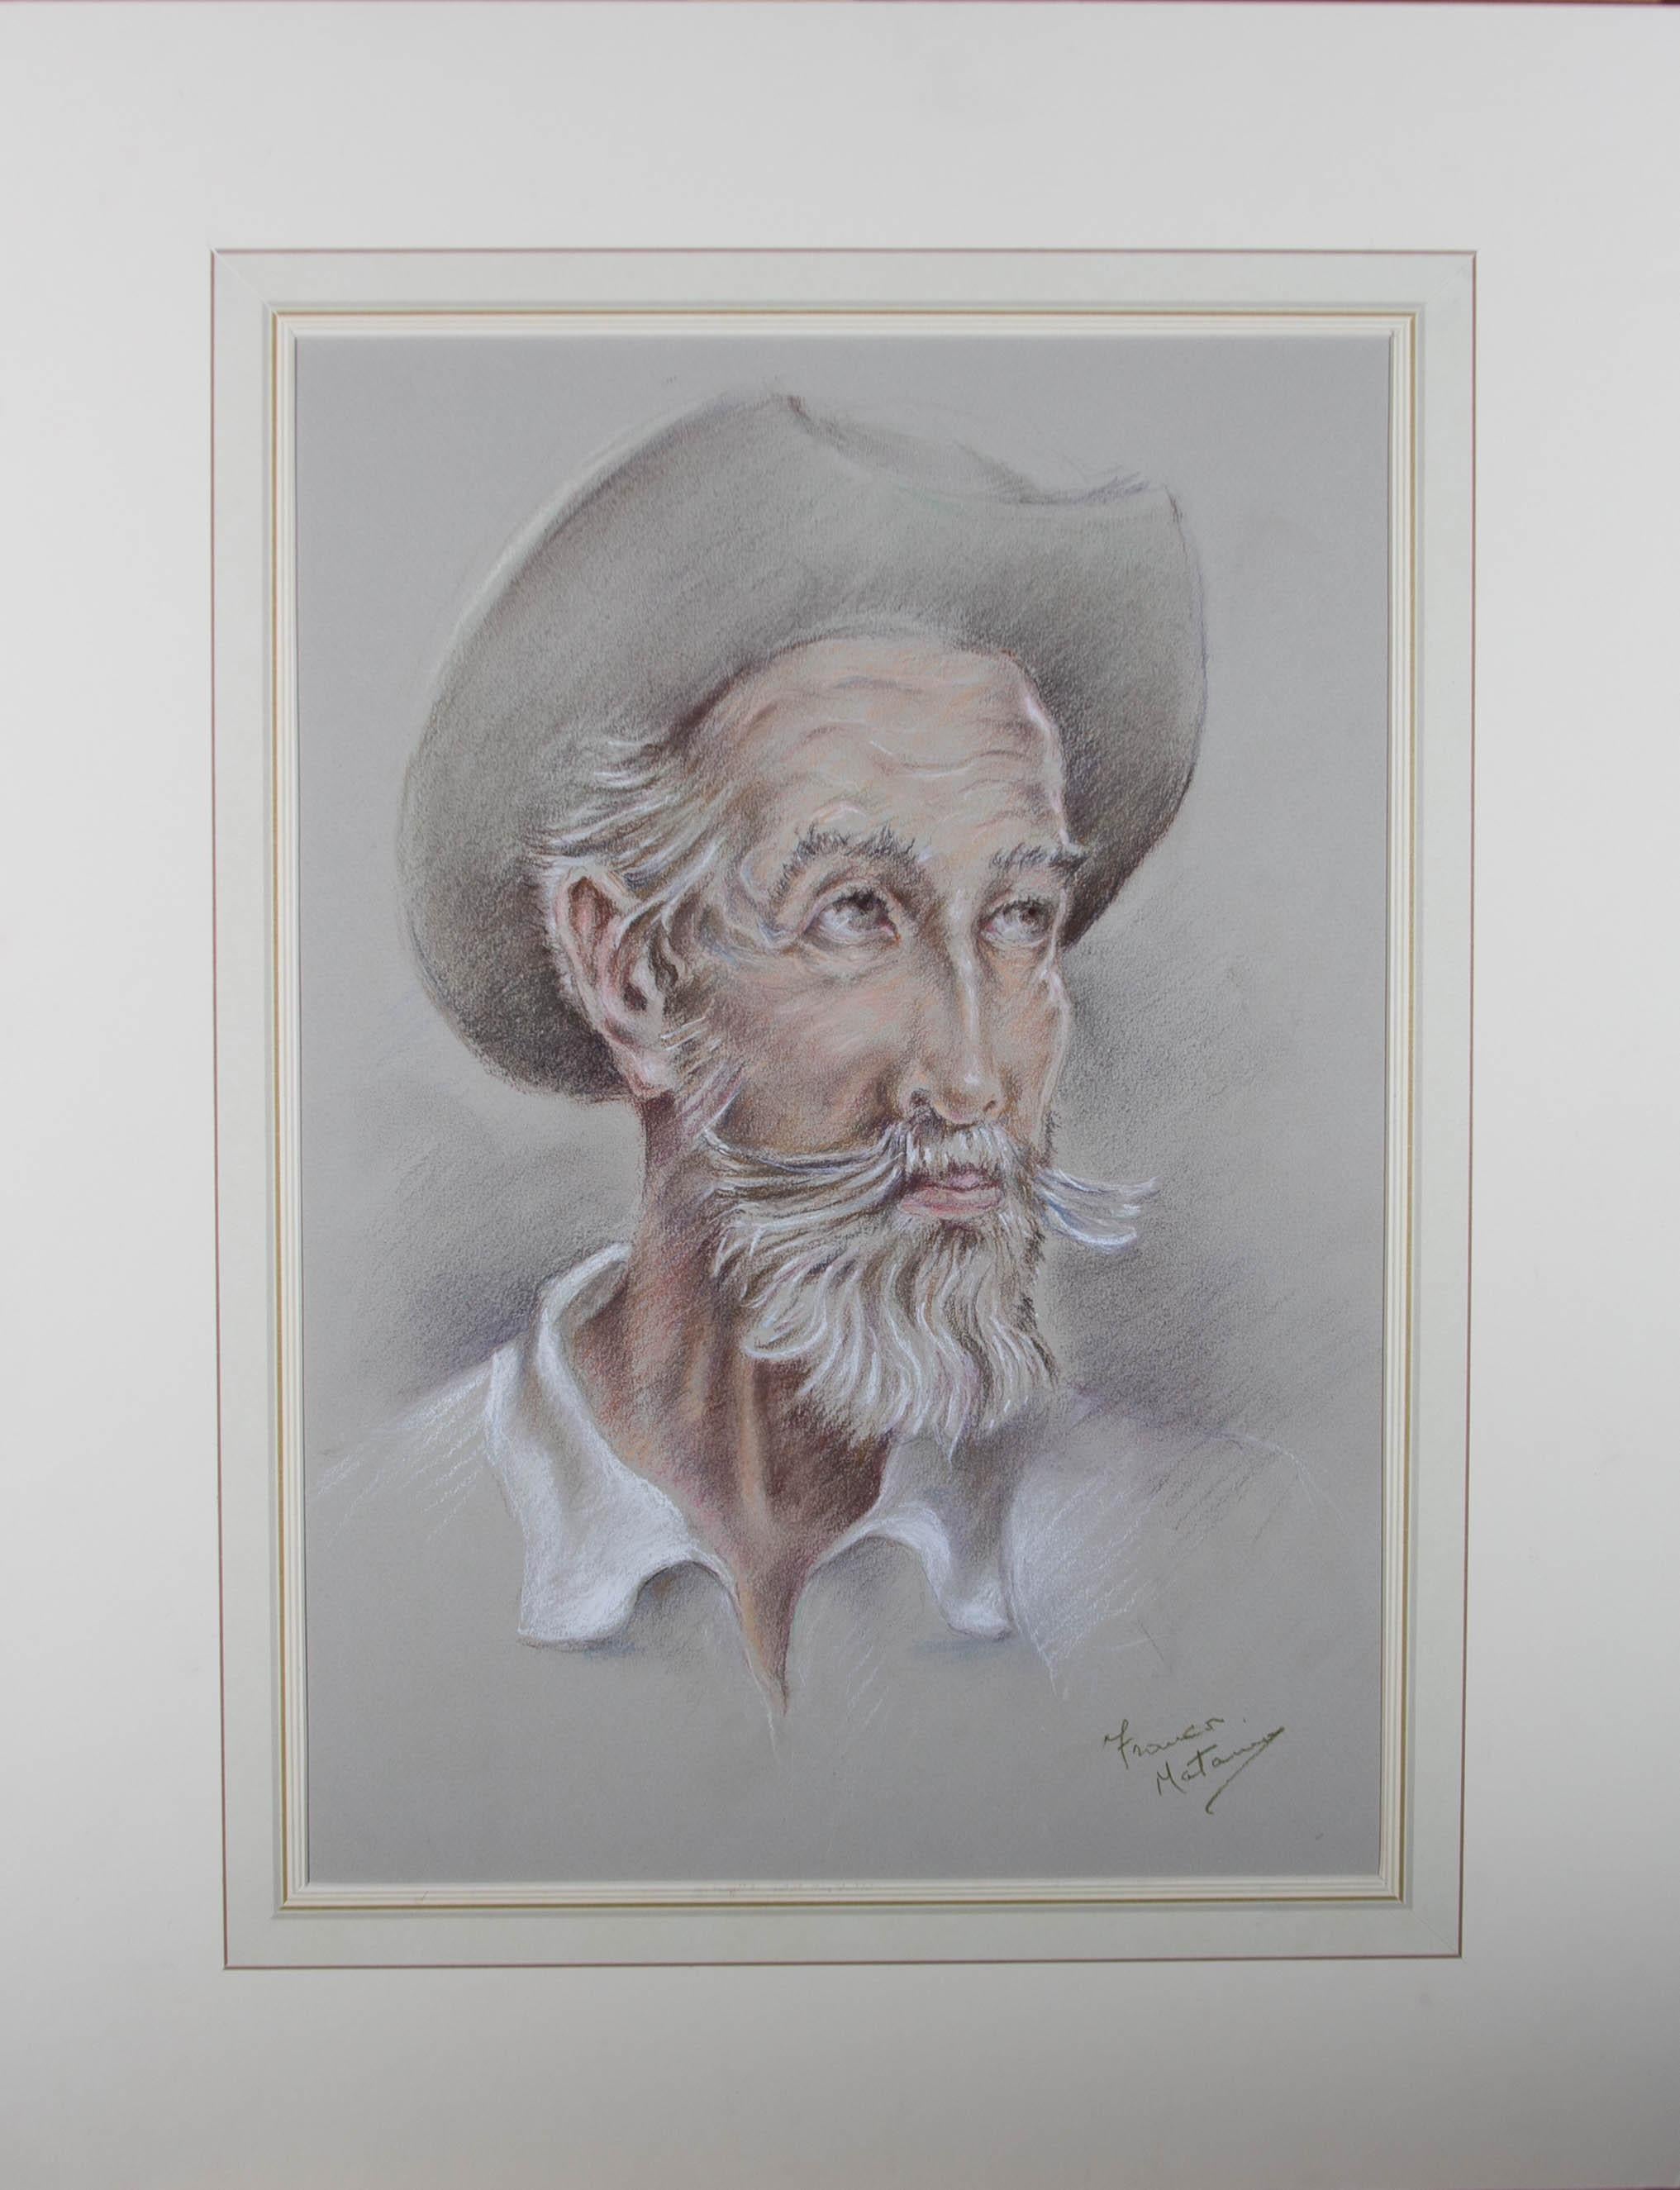 A charming chalk drawing by the artist Franco Matania, depicting an old man in a hat. Signed to the lower right-hand corner. Well-presented in a wash line card mount. On wove.
